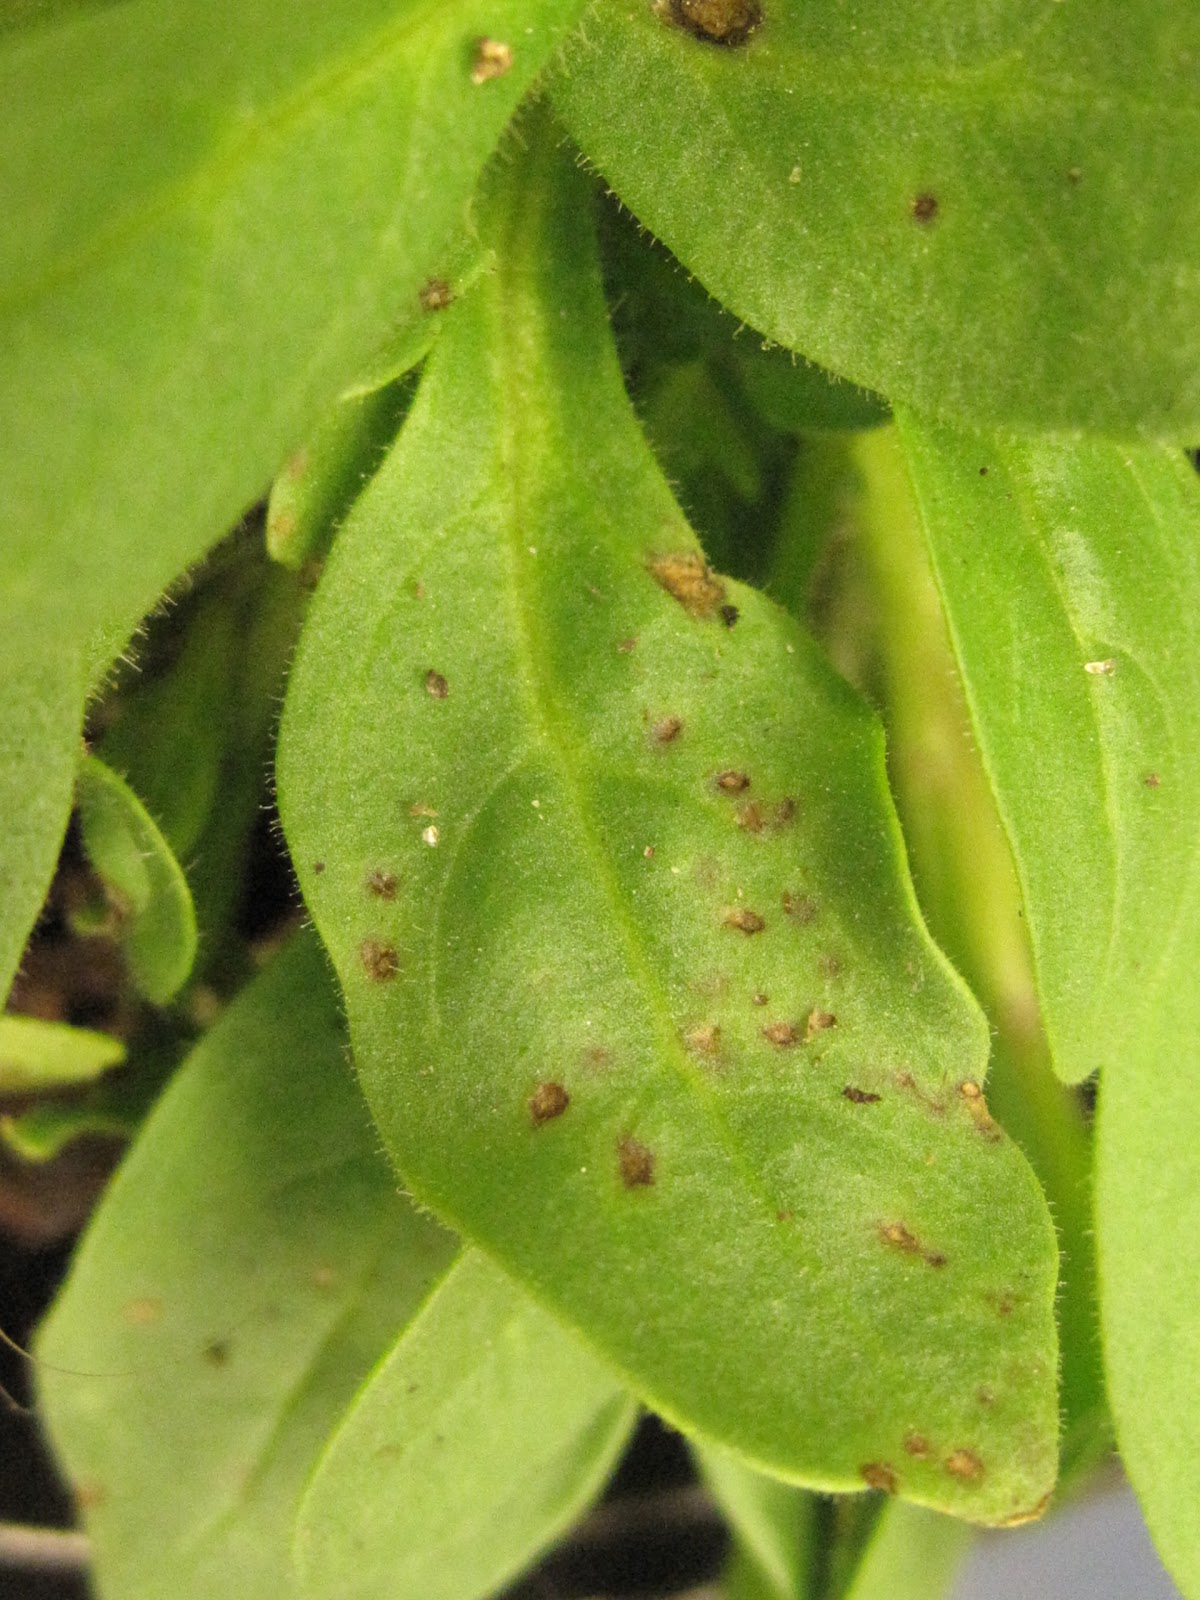 NCSU PDIC: Bacterial Leaf Spot: Acidovorax in the Greenhouse